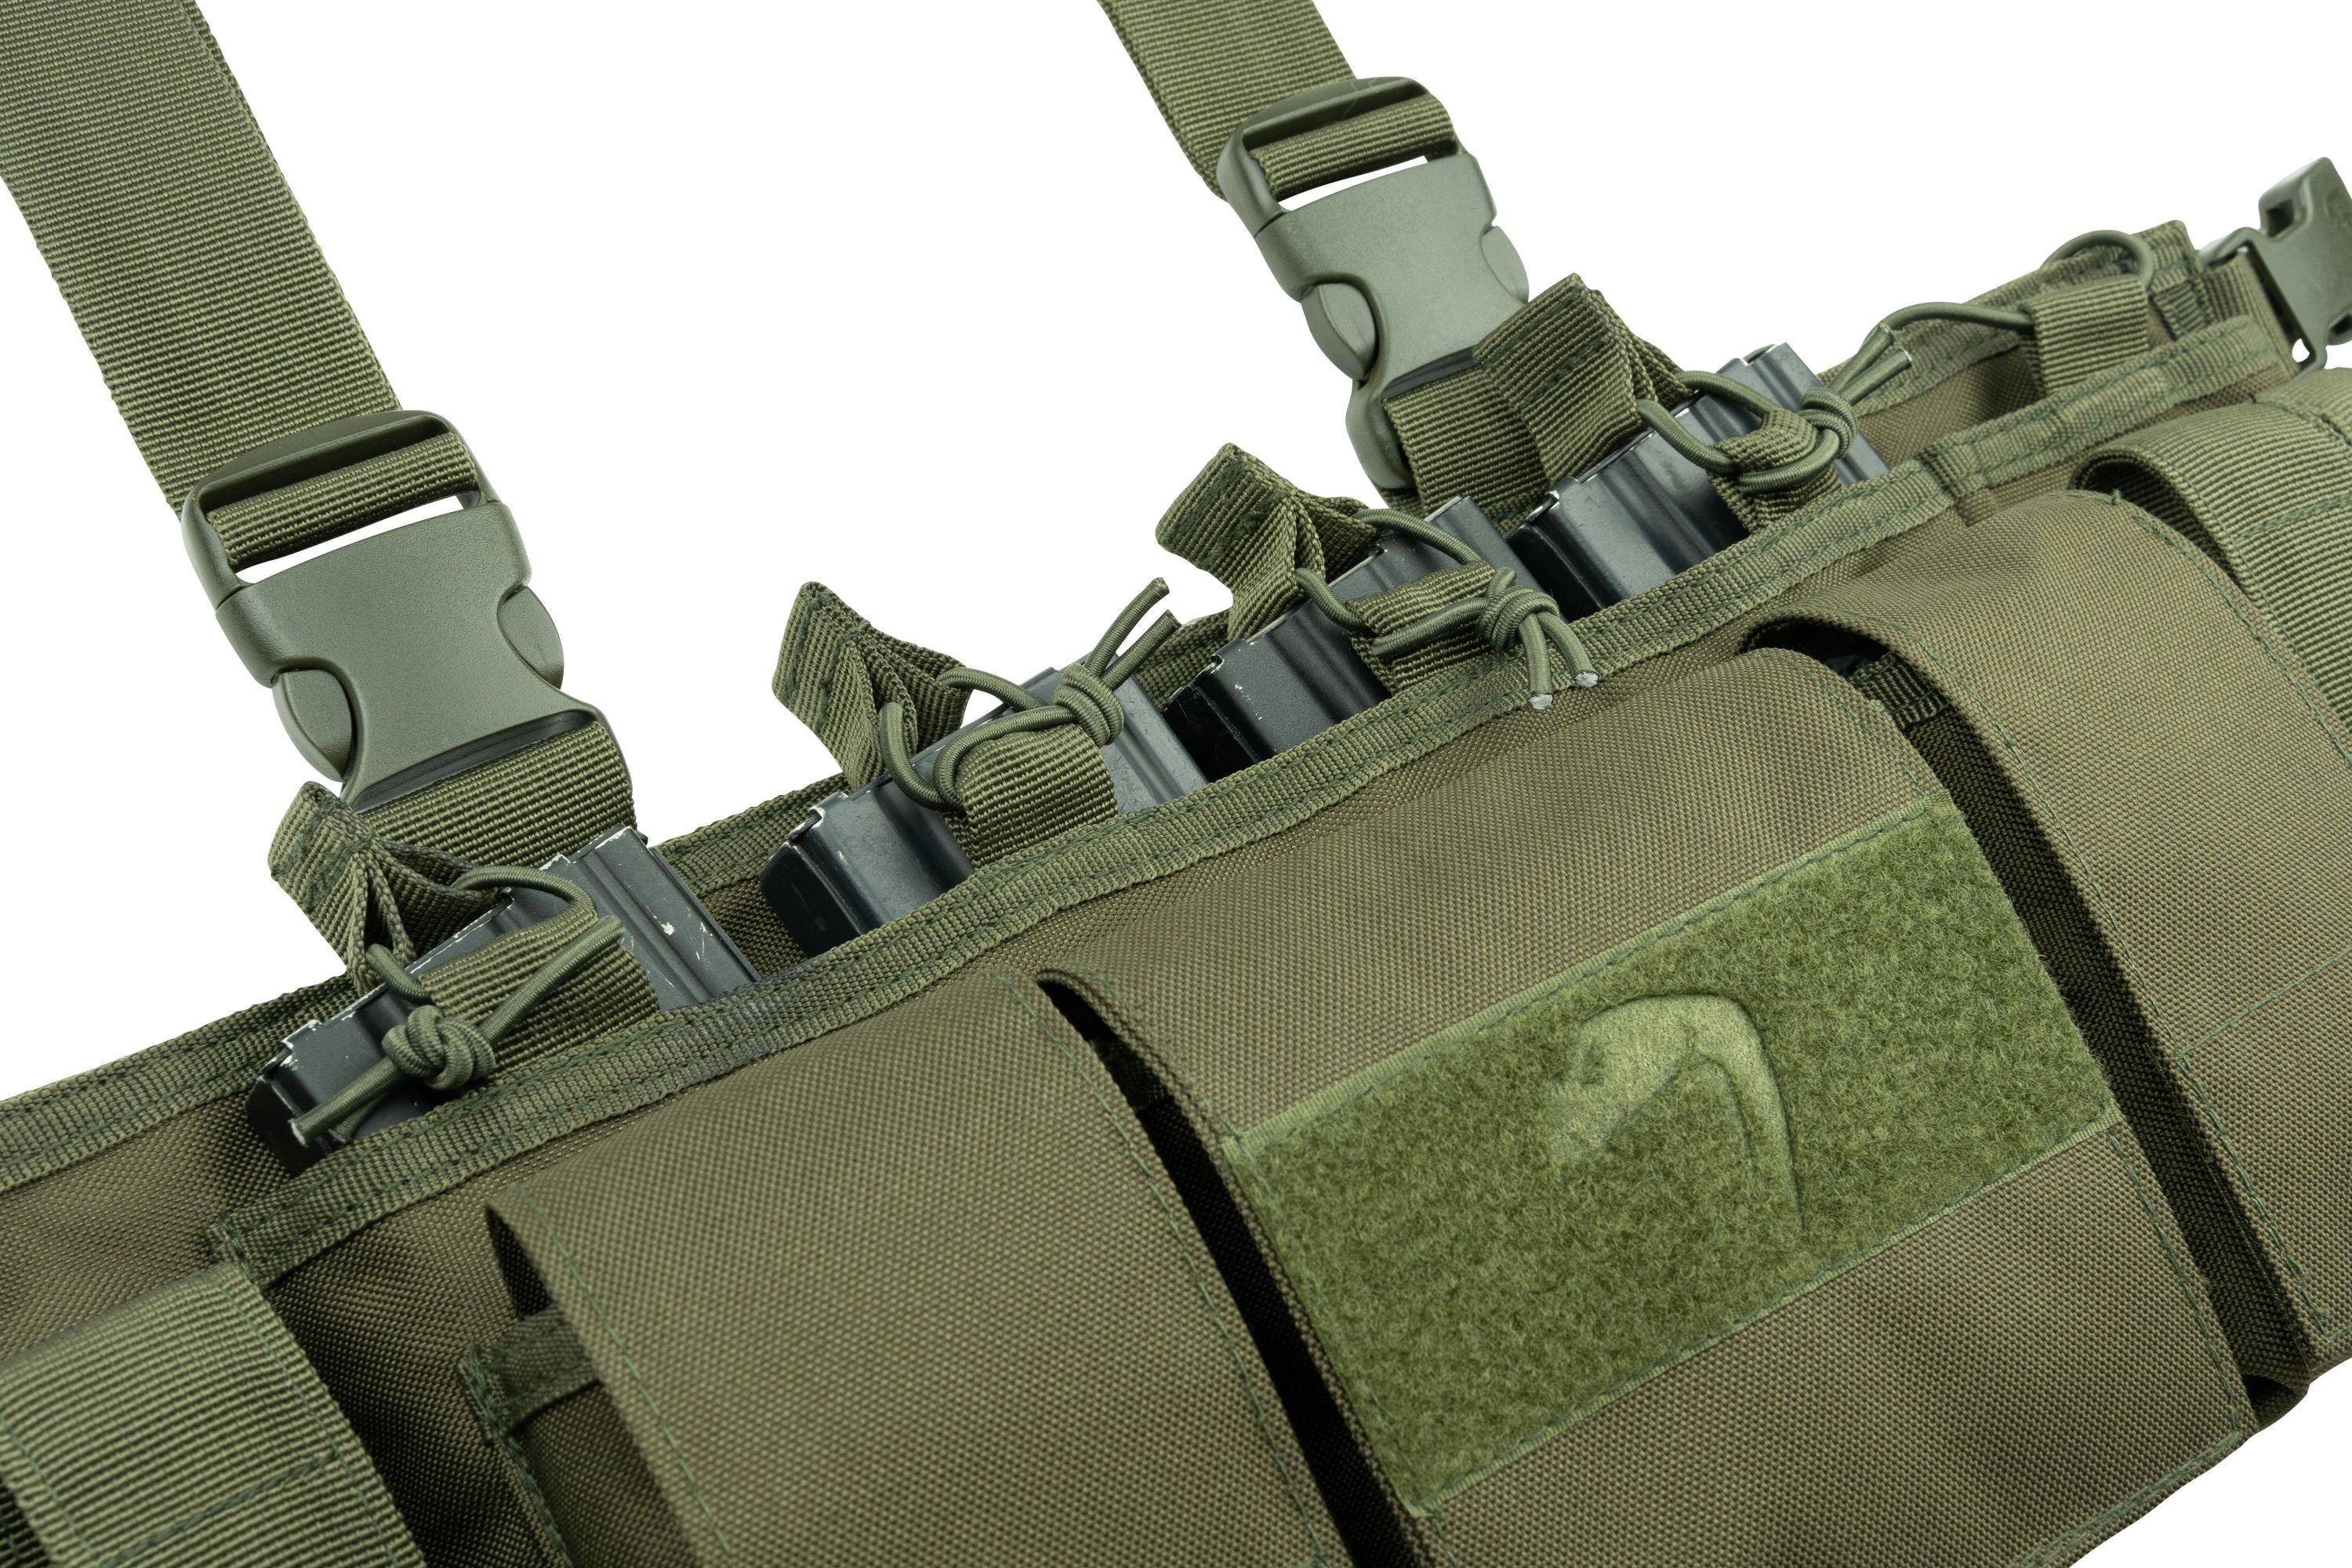 Viper Tactical Special Ops Chest Rig - oliivinvihreä